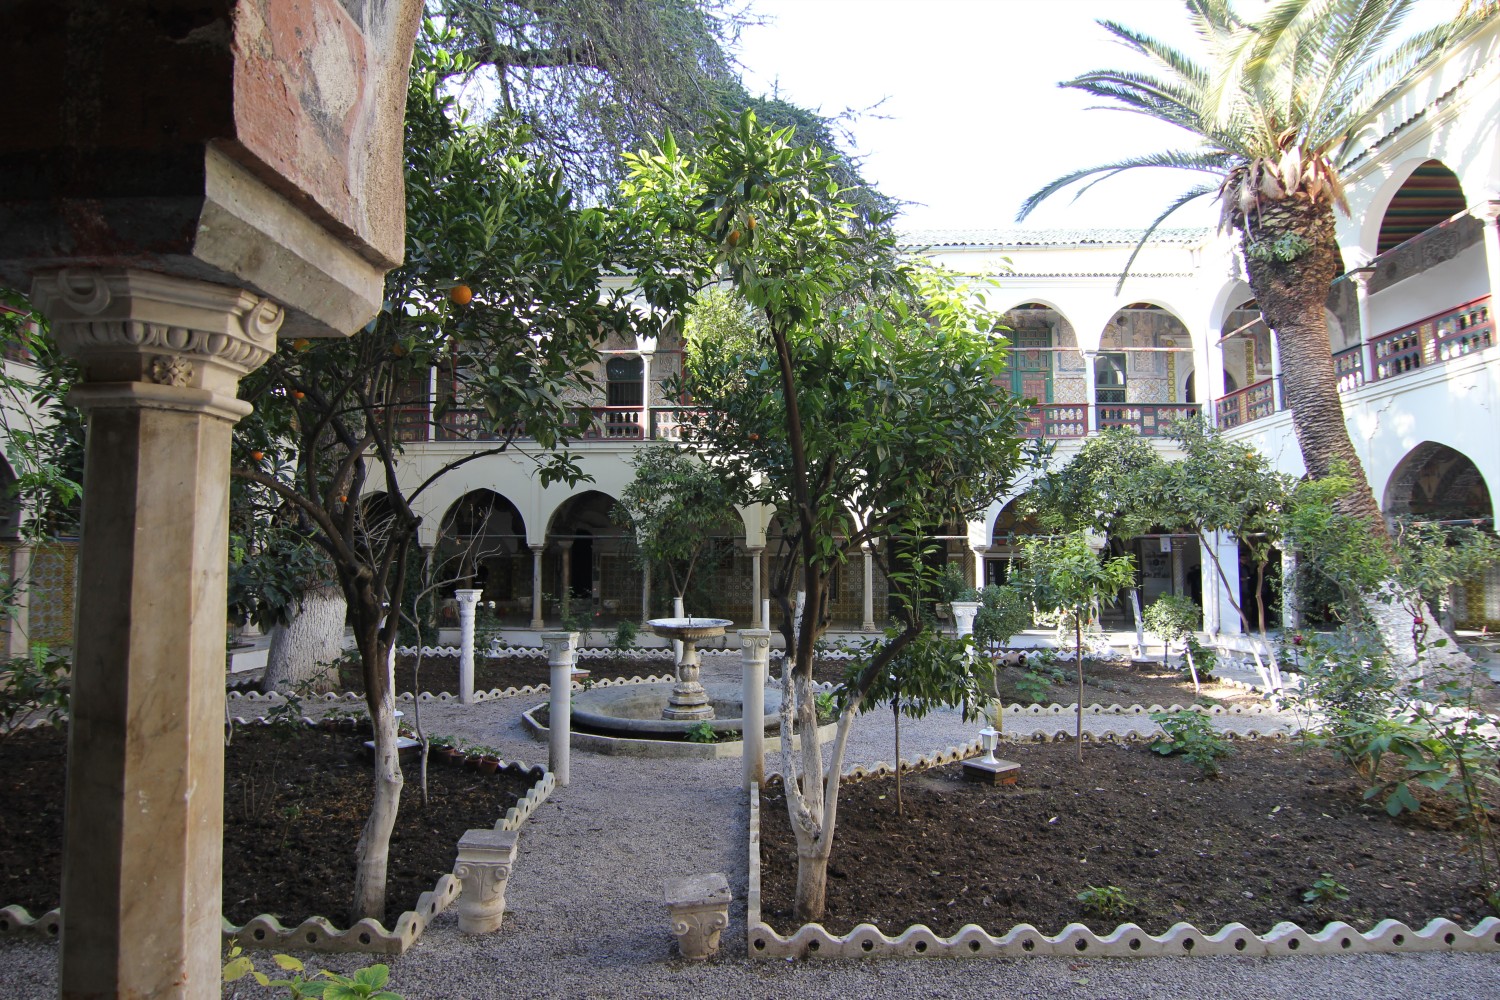 Orange trees garden, axial view showing central fountain and west galleries, on the left is visible an octagonal capital with crescent shapes as decorations